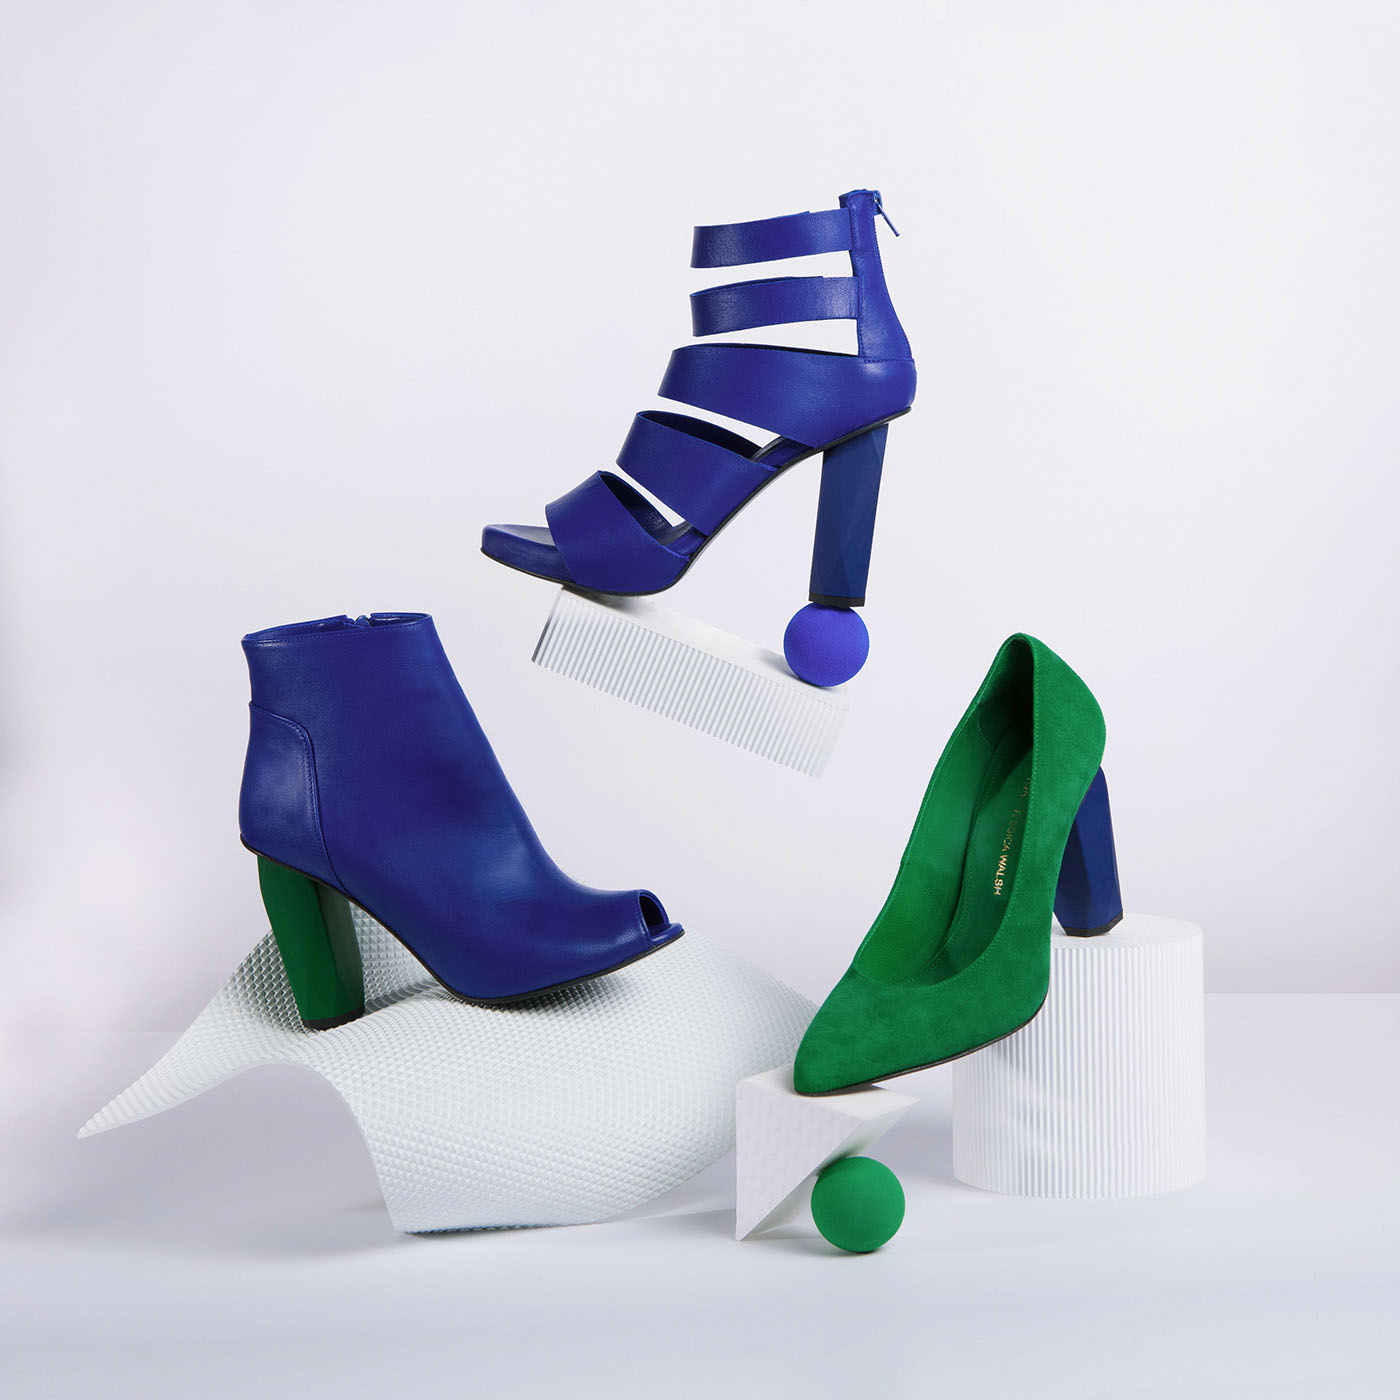 still life table top styling  Monochromatic graphic design  shoes sagmeister jessica walsh guava